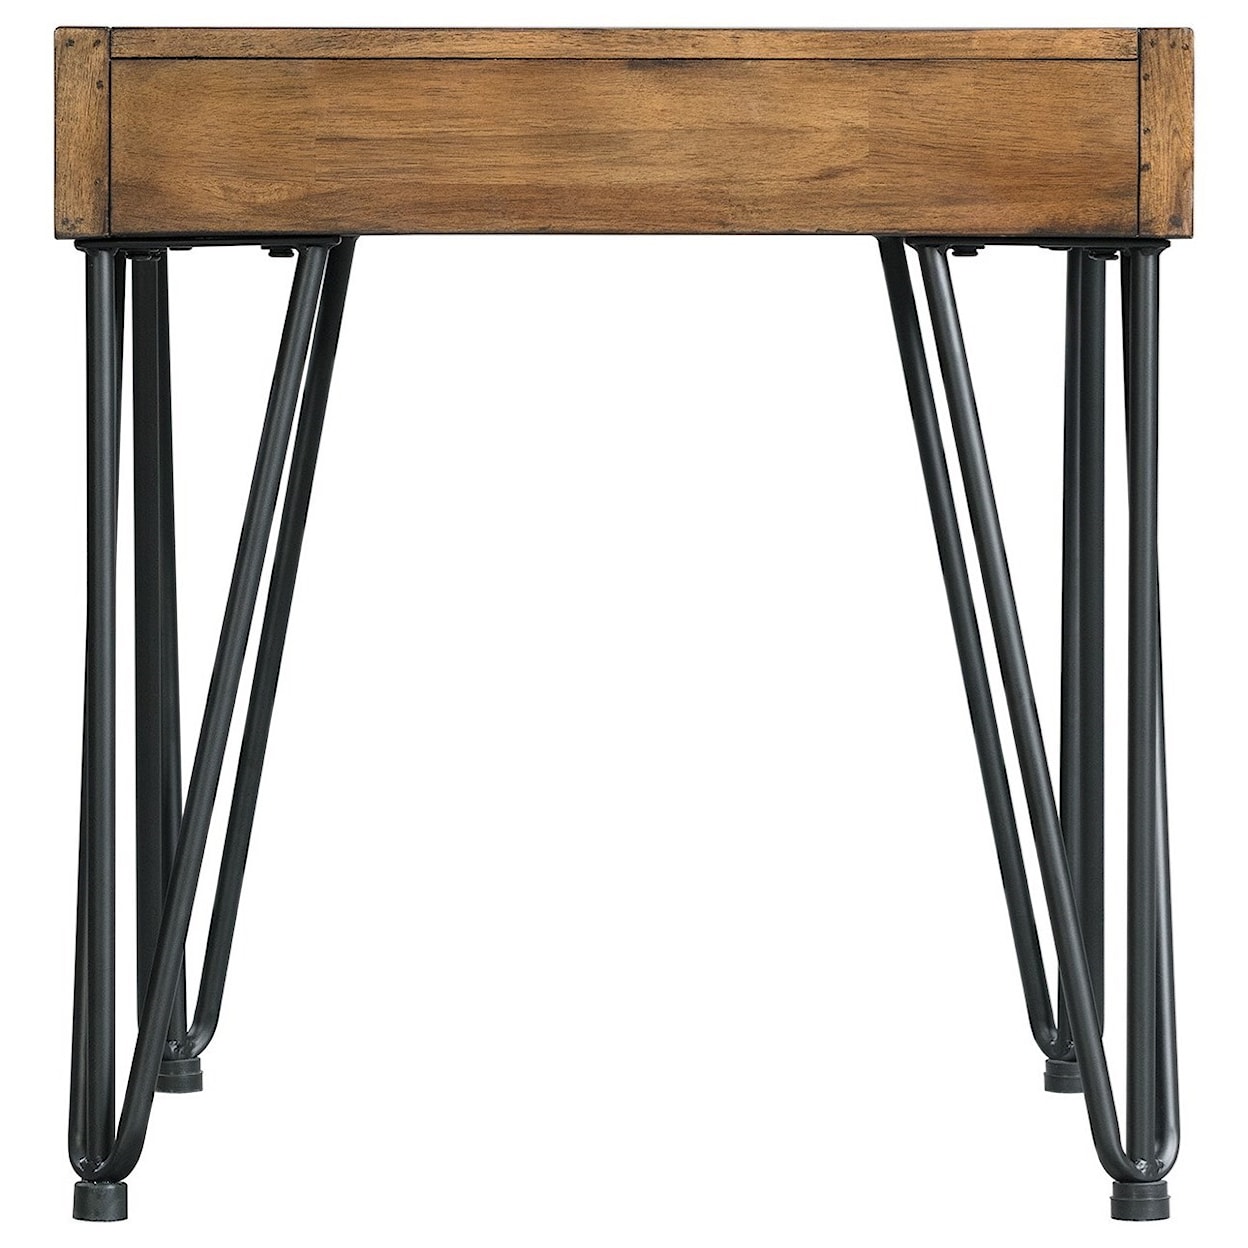 Elements International Boone End Table